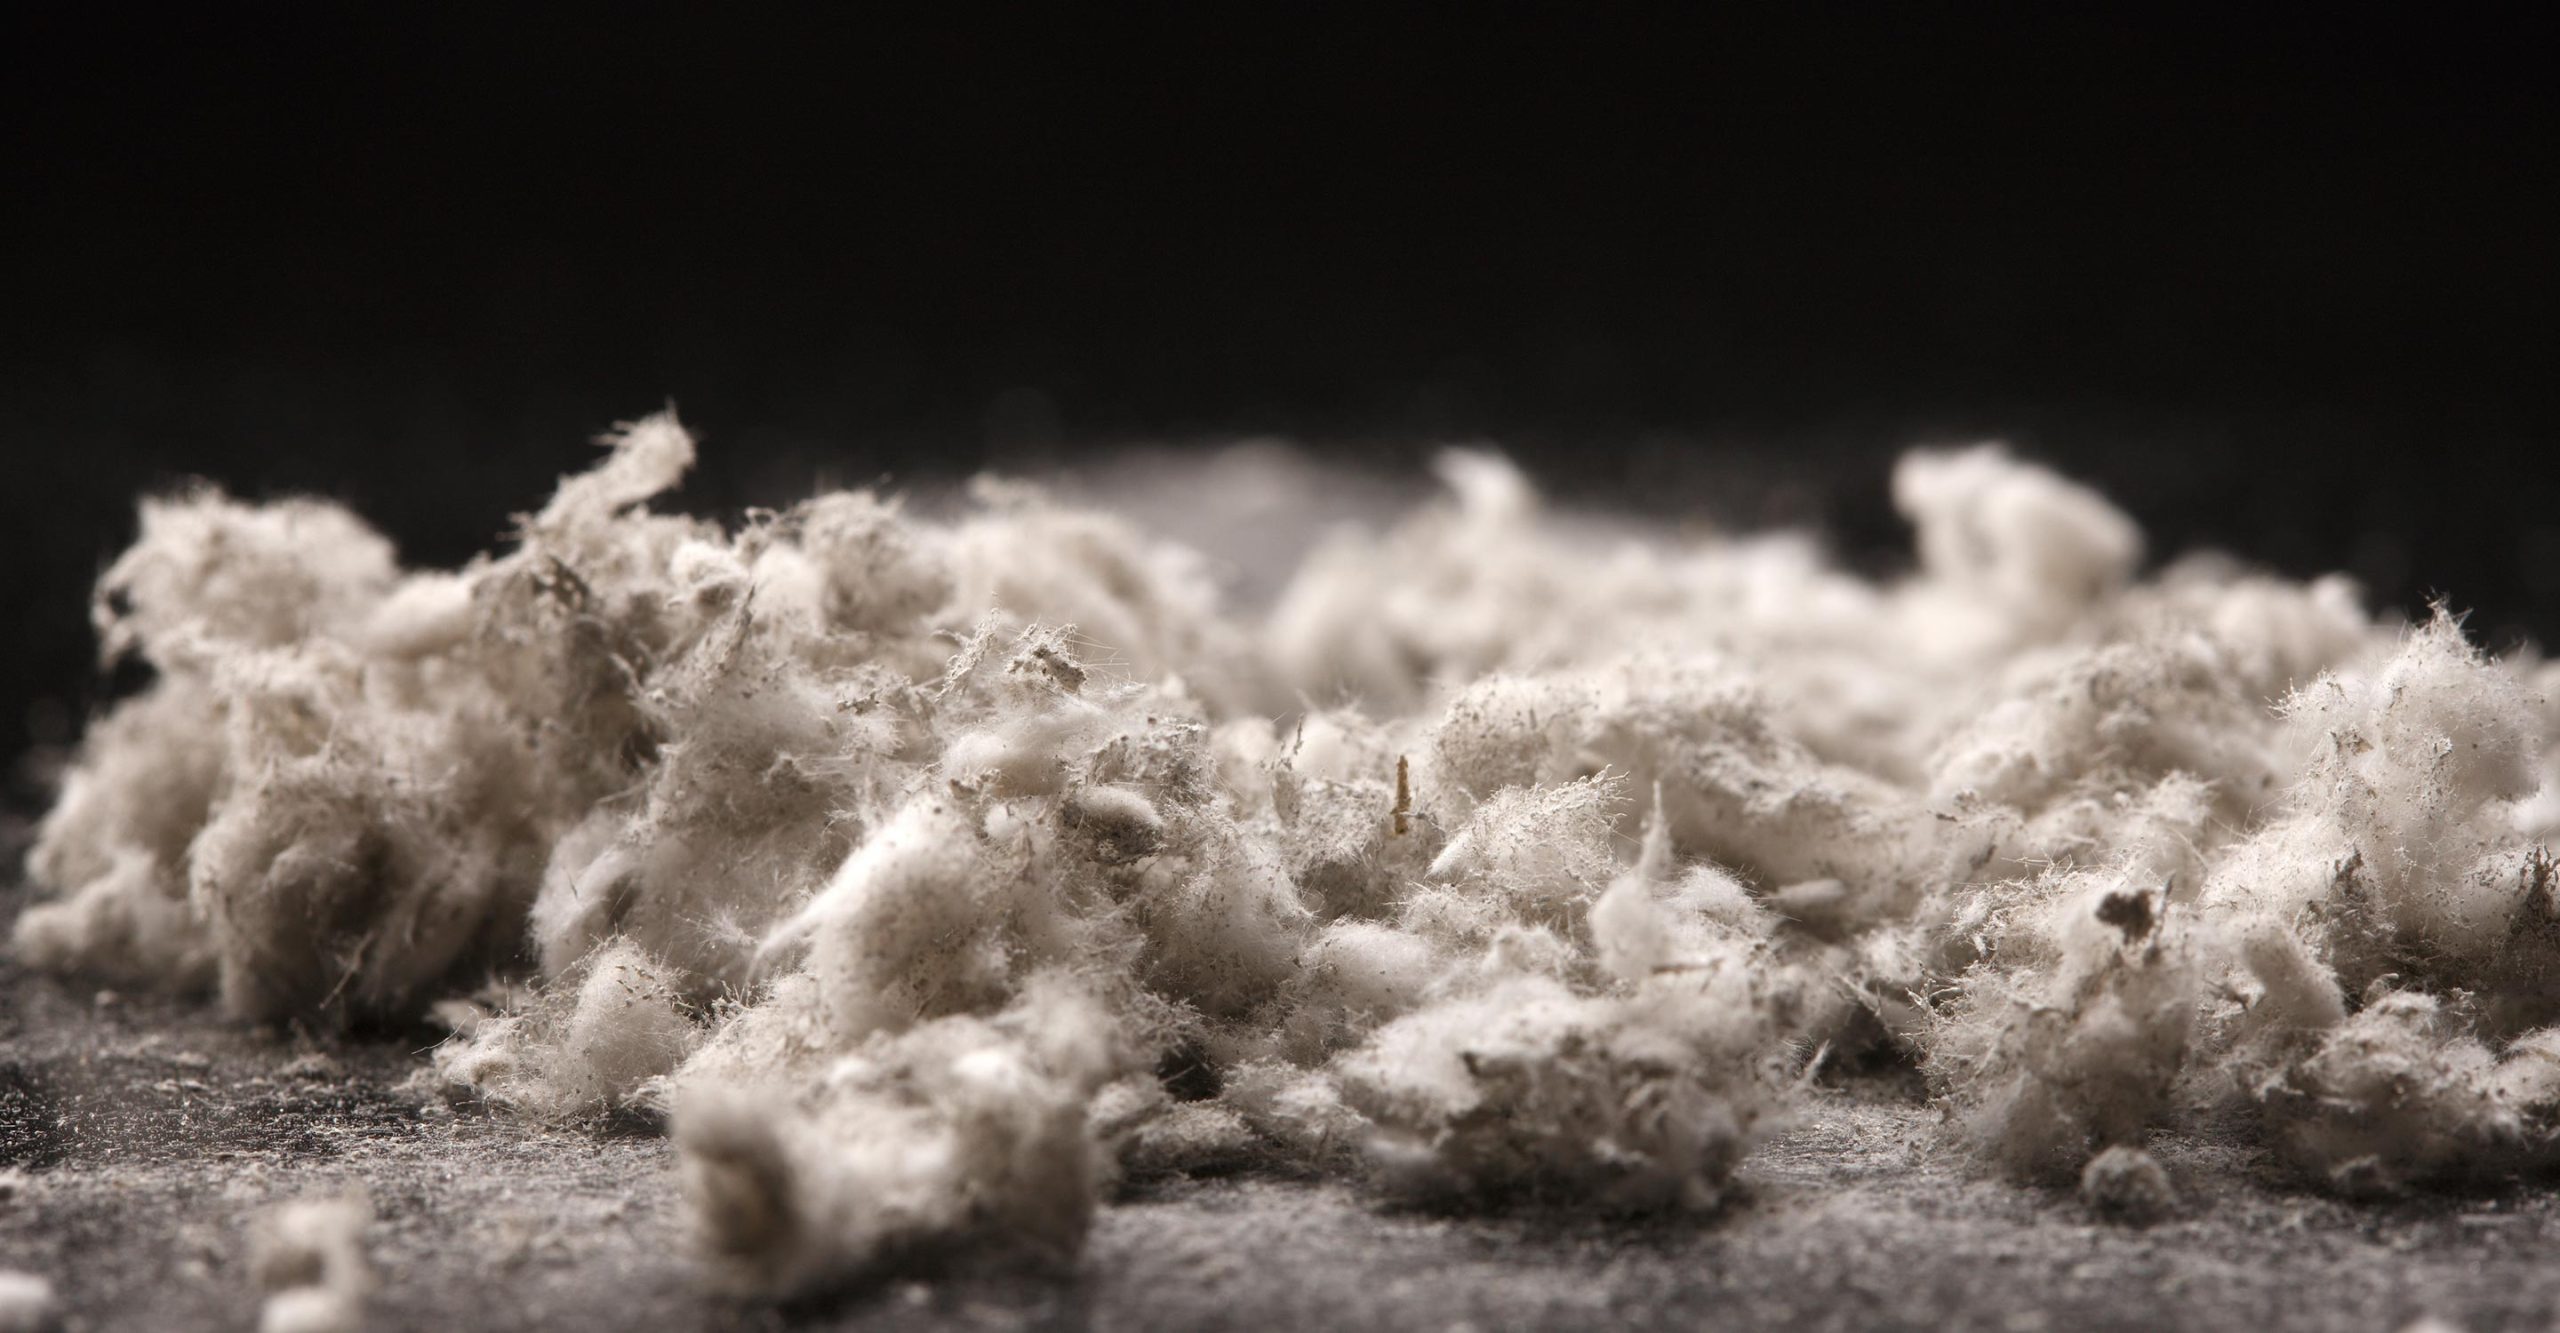 Clearing the Air: Debunking Common Misconceptions About Asbestos